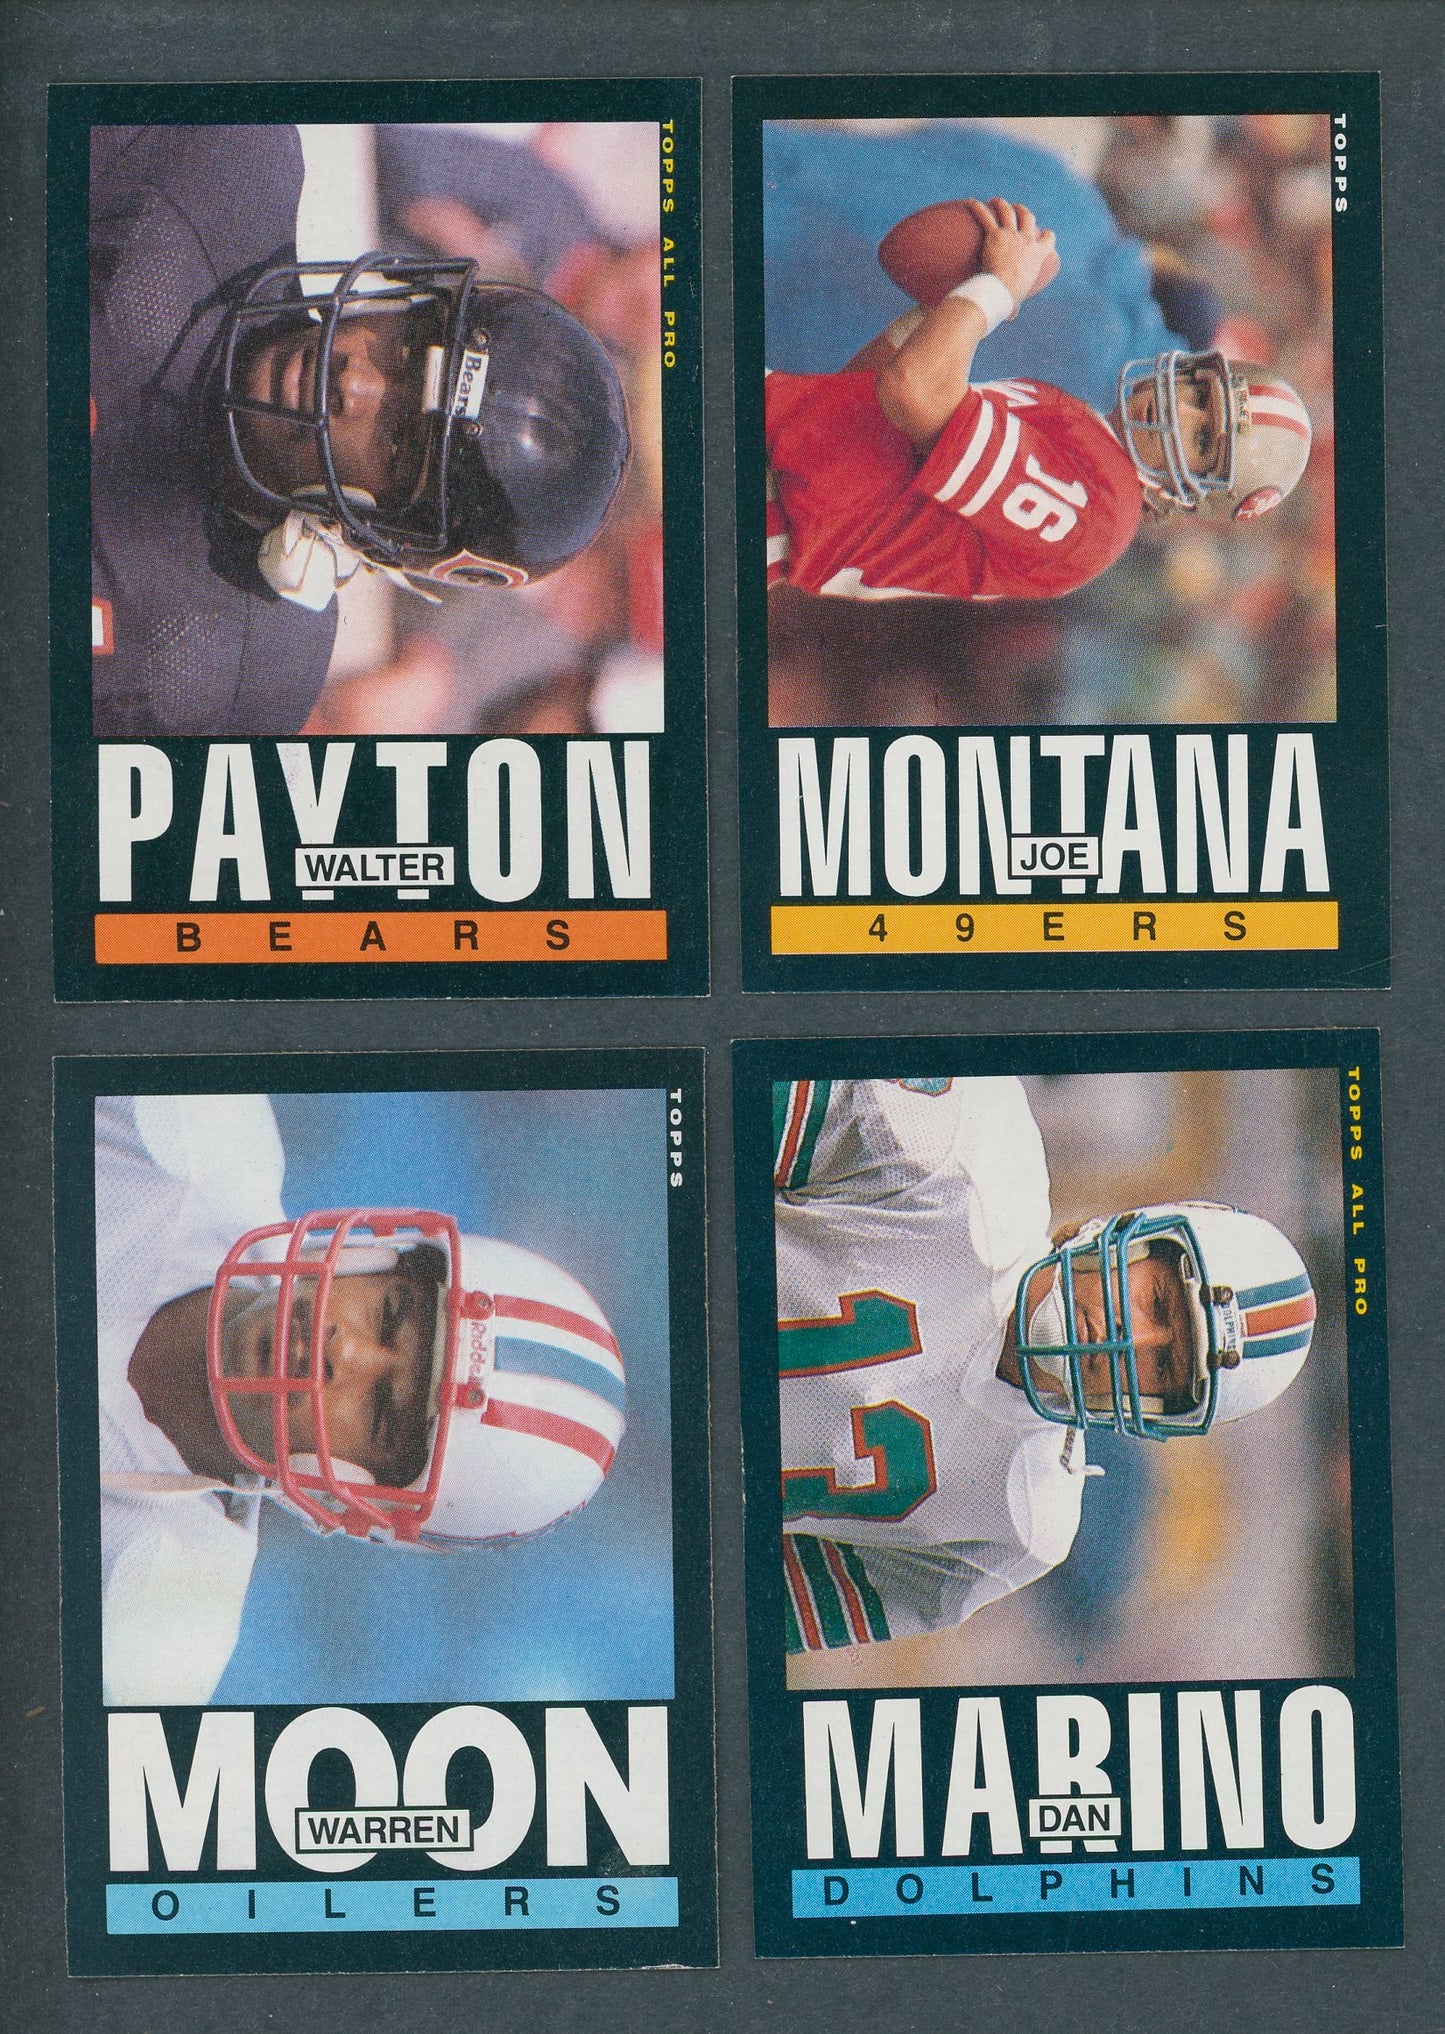 1985 Topps Football Complete Set NM NM/MT (396) (22-45)